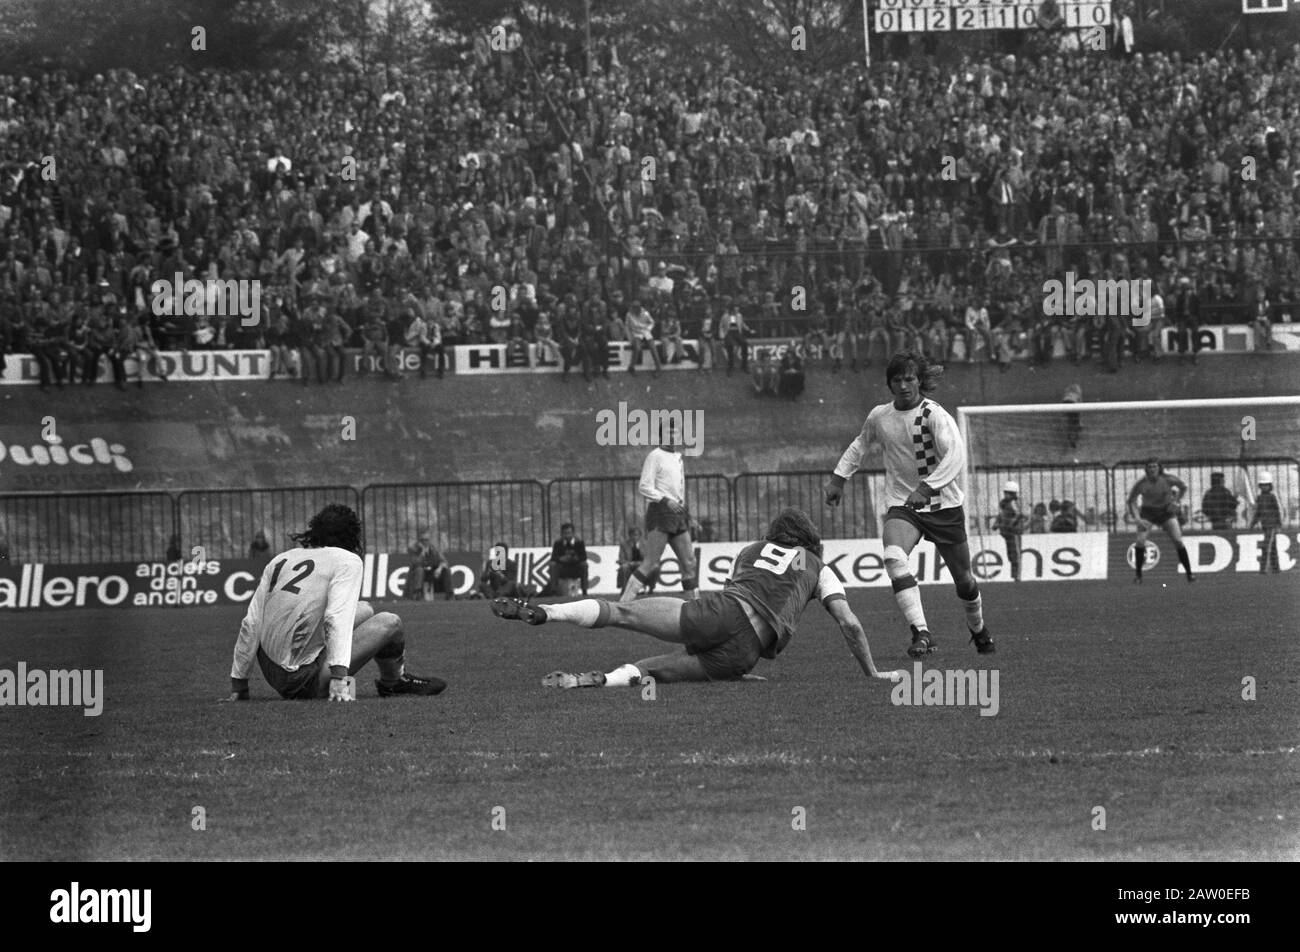 NEC v Feyenoord 0-2 game moments Annotation: The standing player Jan Peters Date: April 28, 1974 Location: Nijmegen Keywords: football Institution Name: Feyenoord Stock Photo